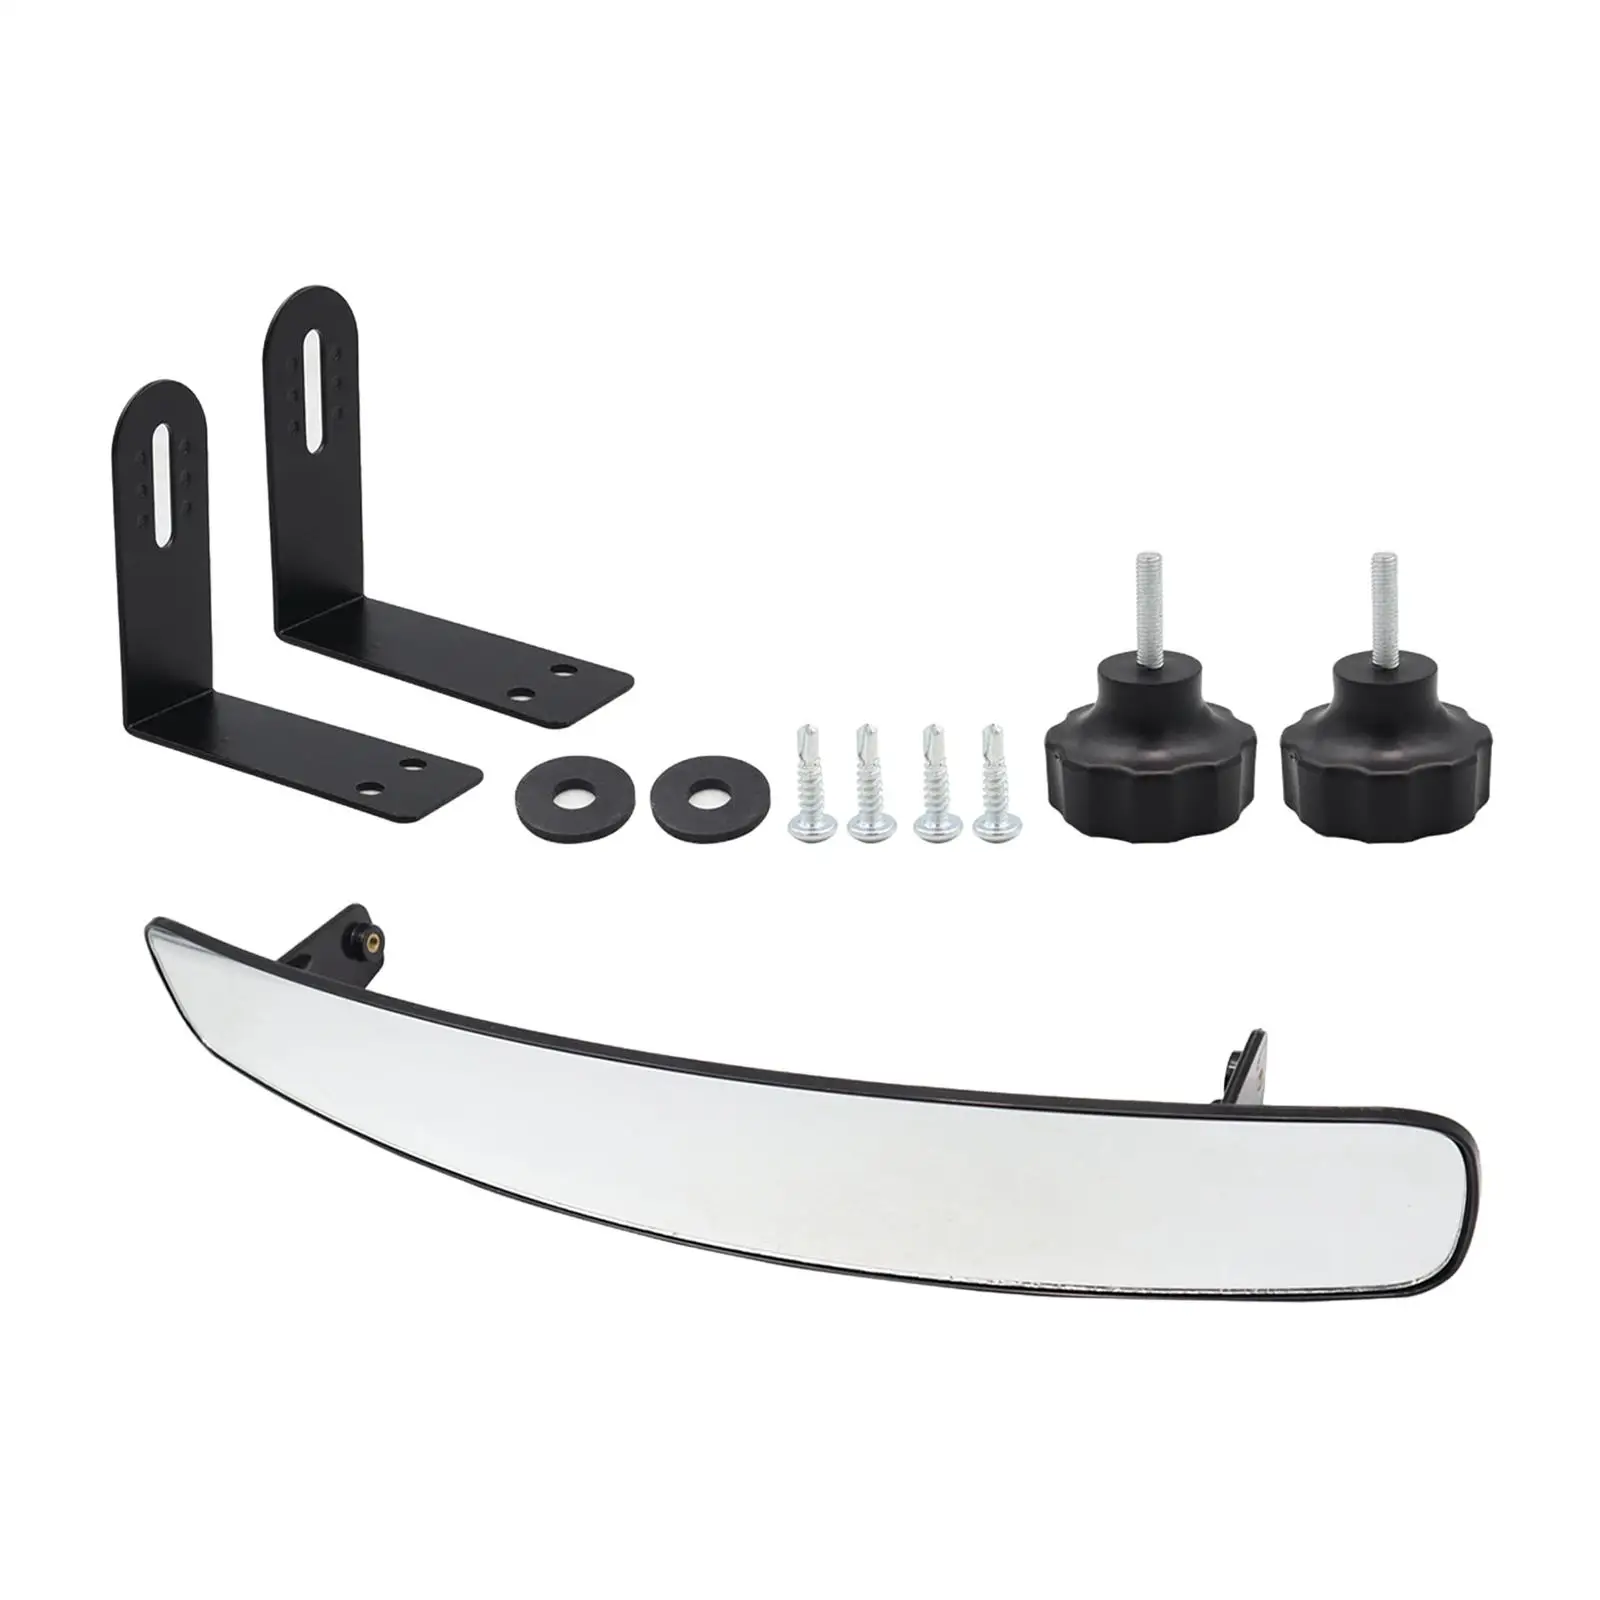 Black Golf Cart Rear View Mirror Accessory Spare Parts Clear Image Replaces 180 Degree Panoramic Rear View Mirror for Ezgo